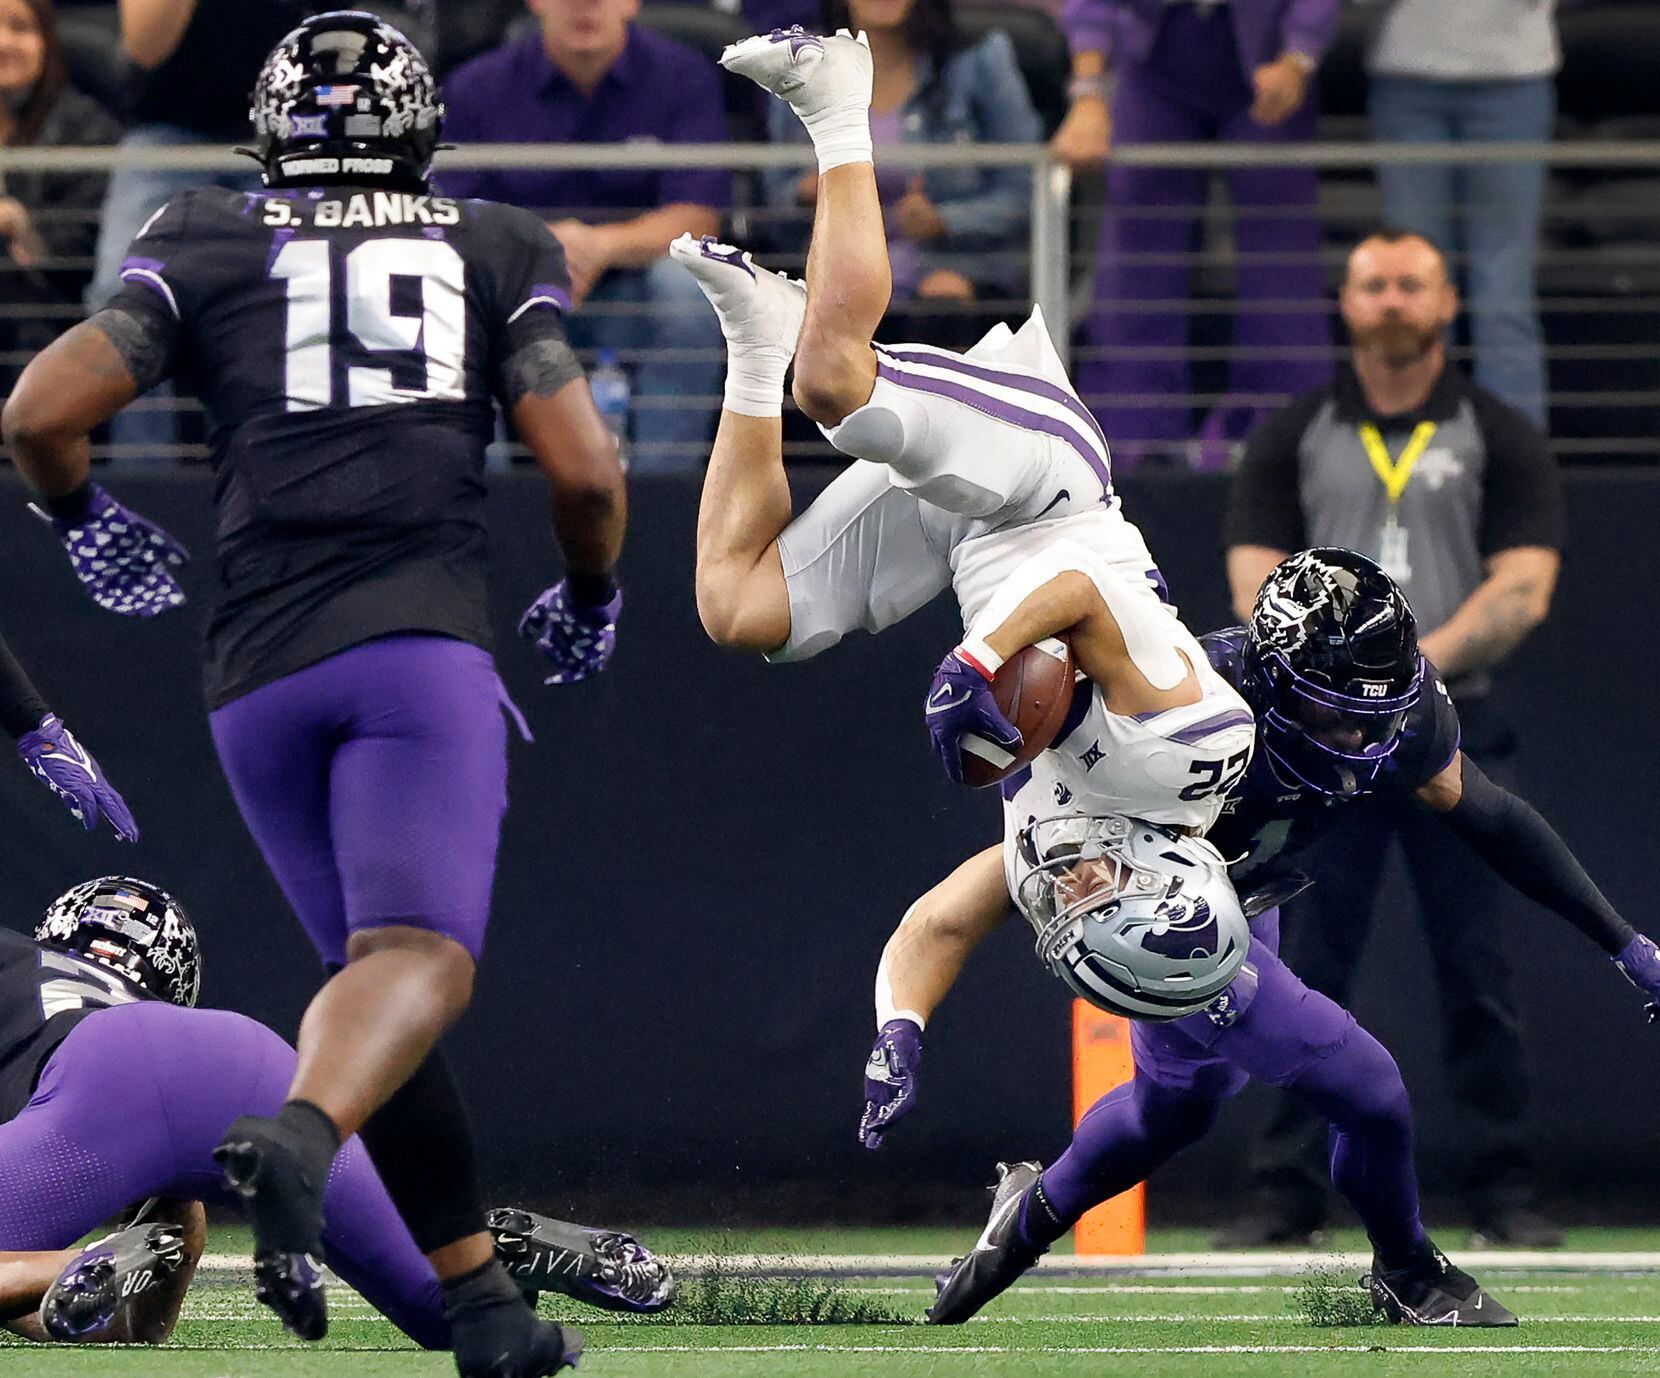 Kansas State Wildcats running back Deuce Vaughn (22) is flipped over after having his legs...